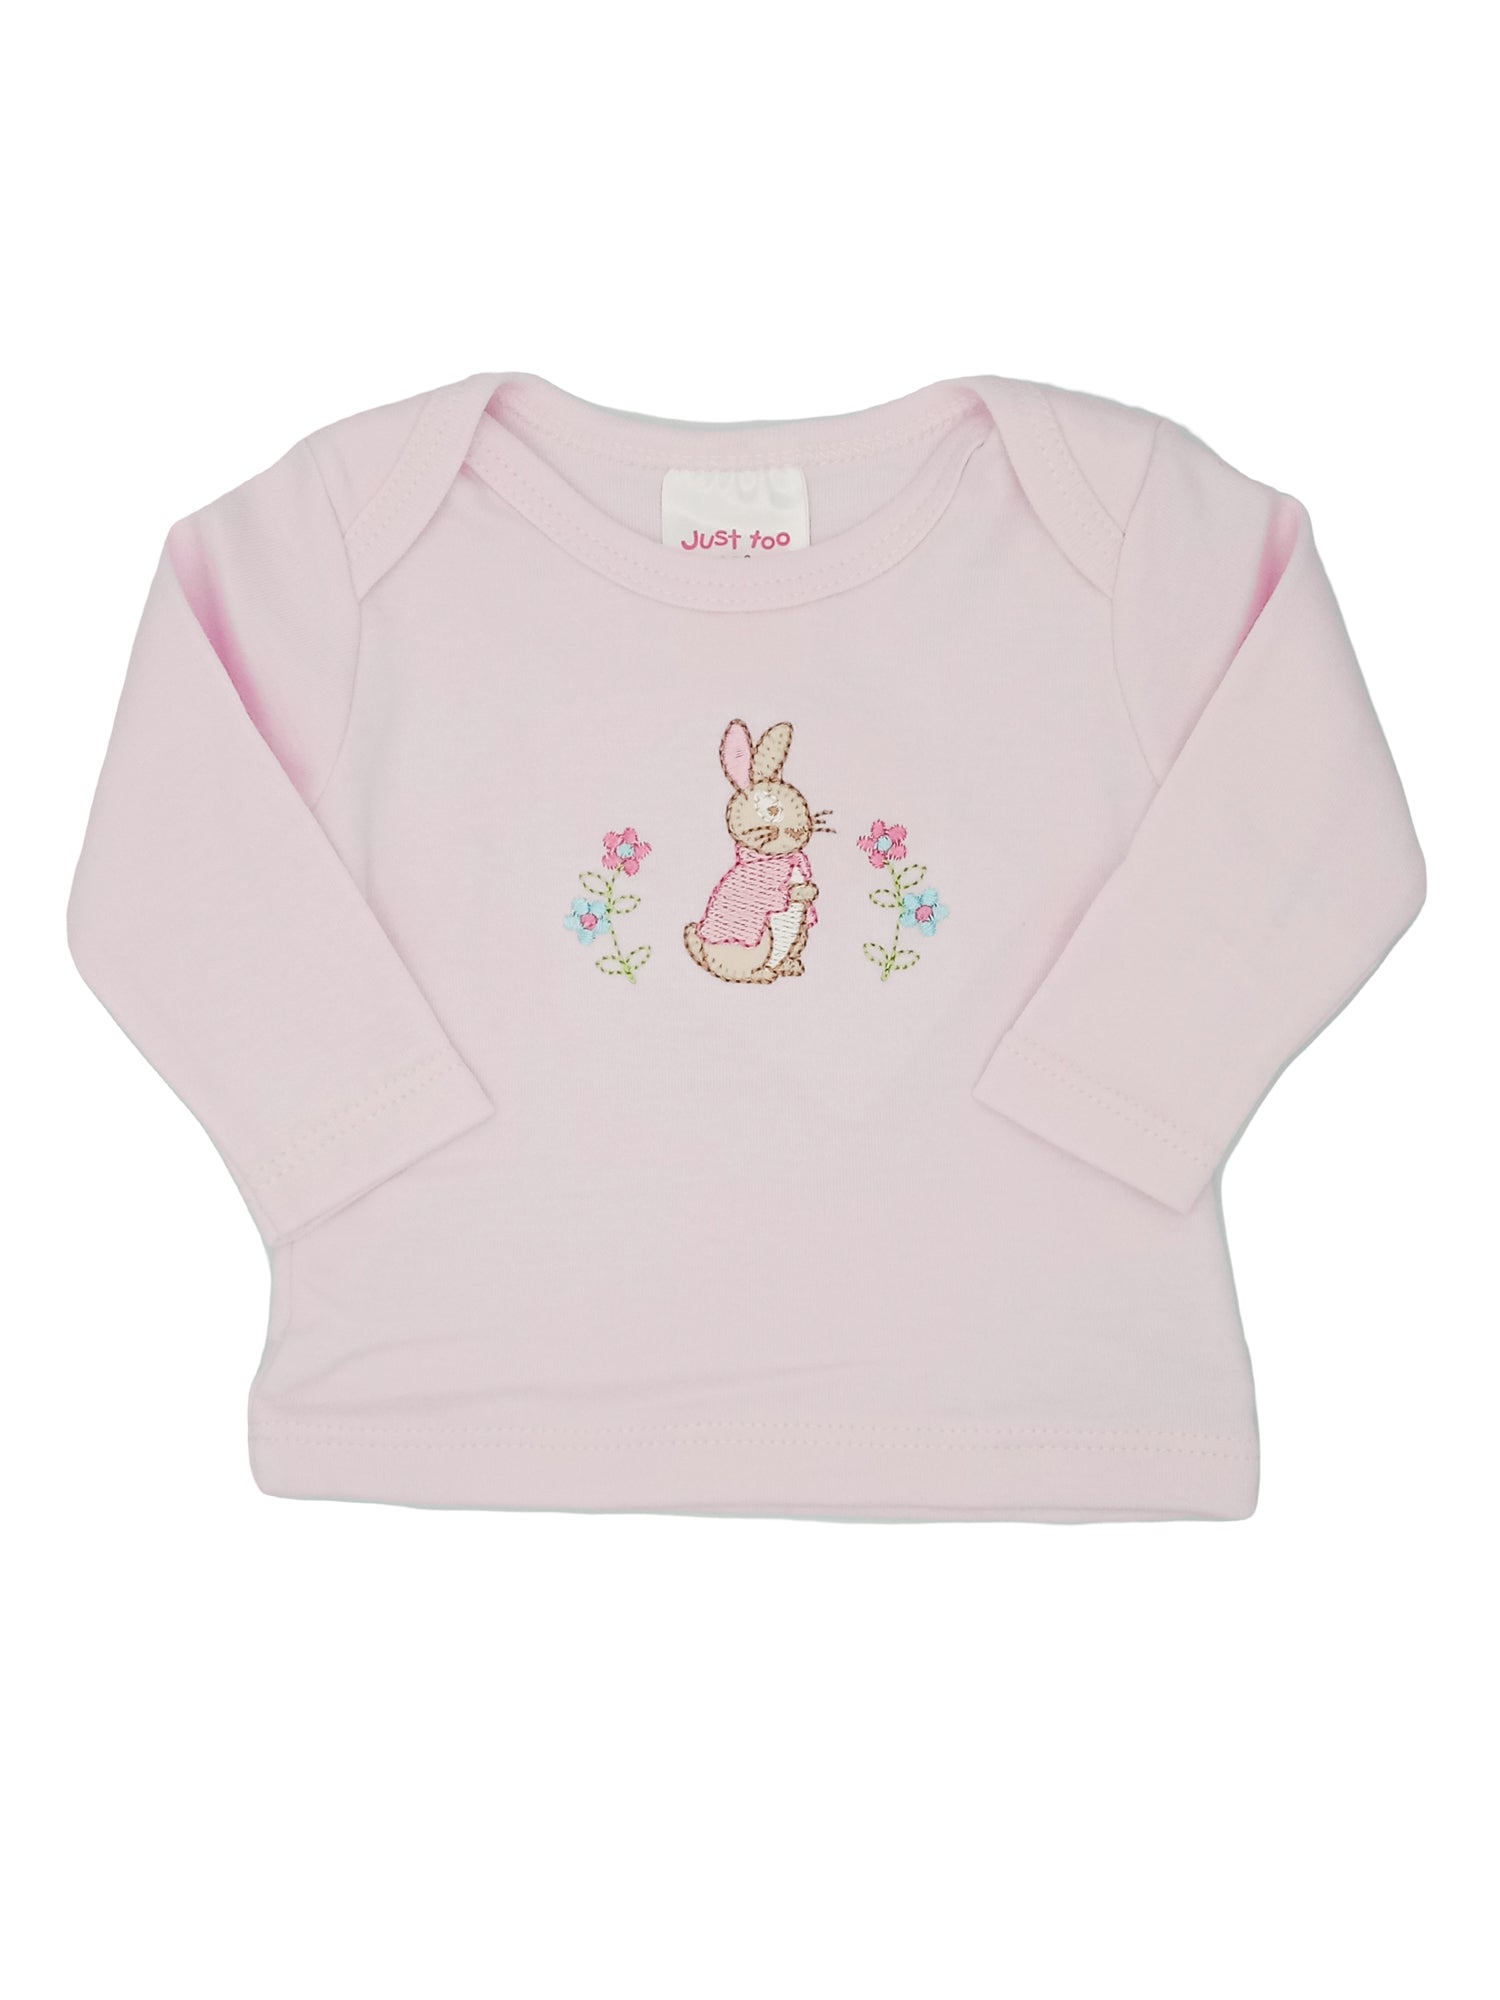 Rabbit 3 Piece Gift Set - Pink : Dungarees, Top and Hat - Set - Just too Cute